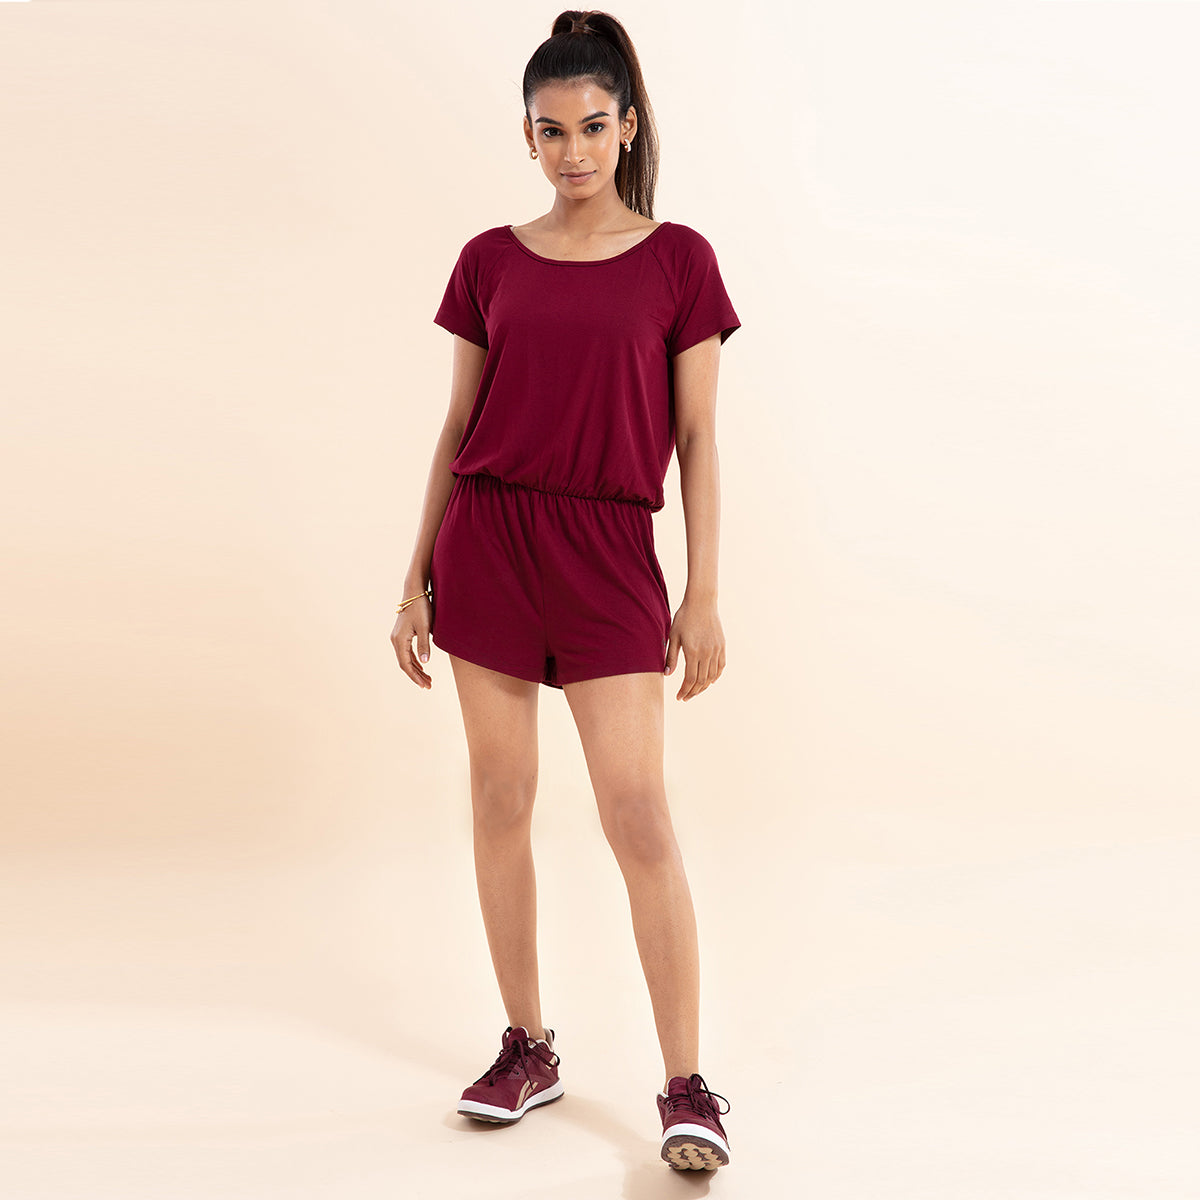 Nykd All Day Chill Pill Supersoft Playsuit- NYK 042A Zinfandel